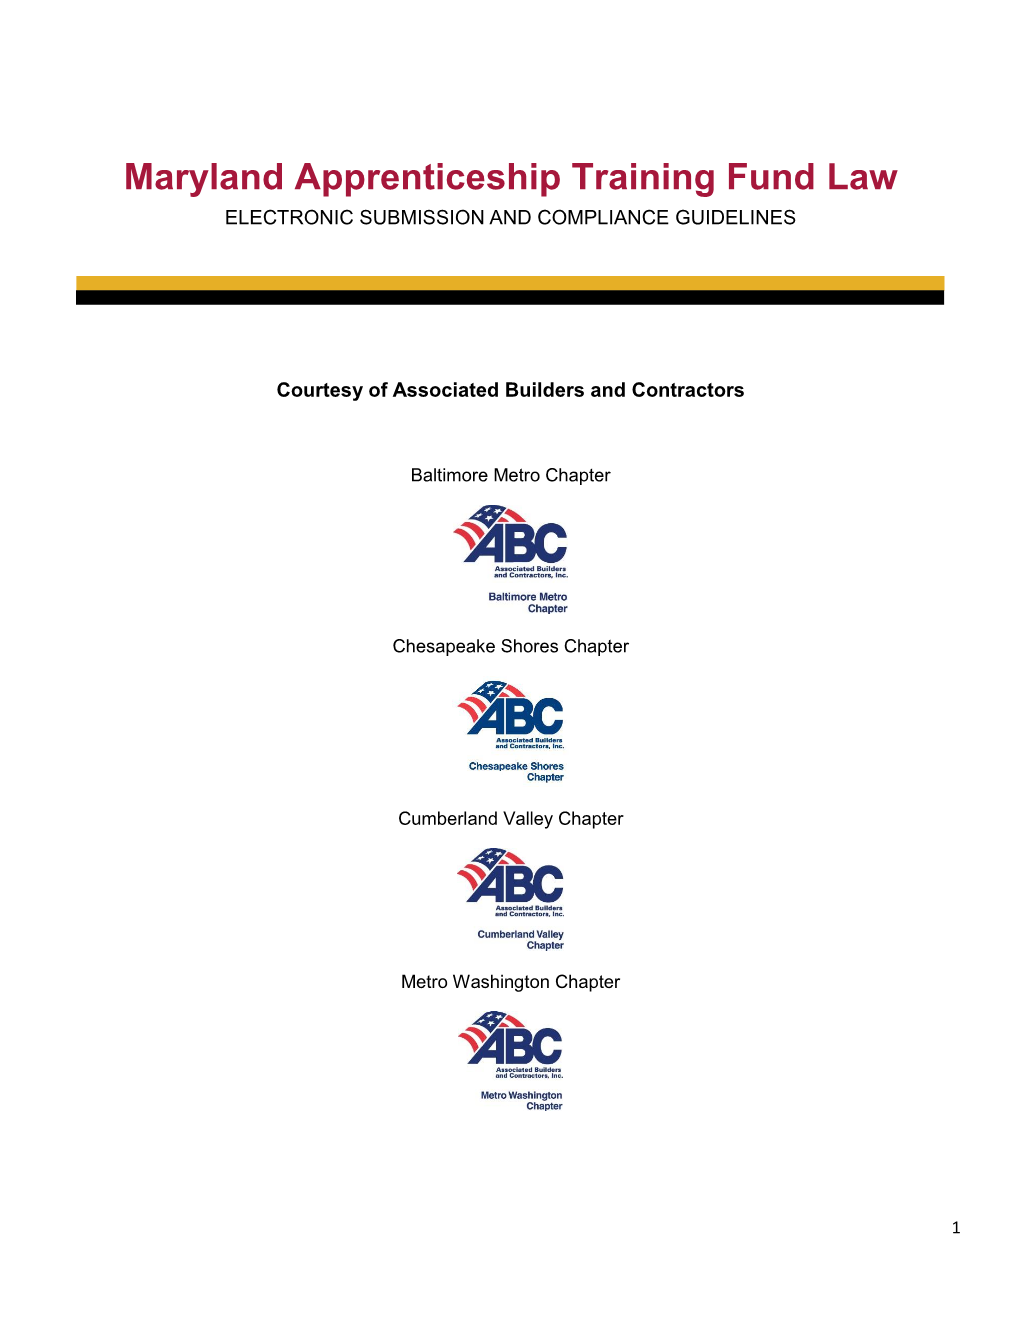 Maryland Apprenticeship Training Fund Law ELECTRONIC SUBMISSION and COMPLIANCE GUIDELINES